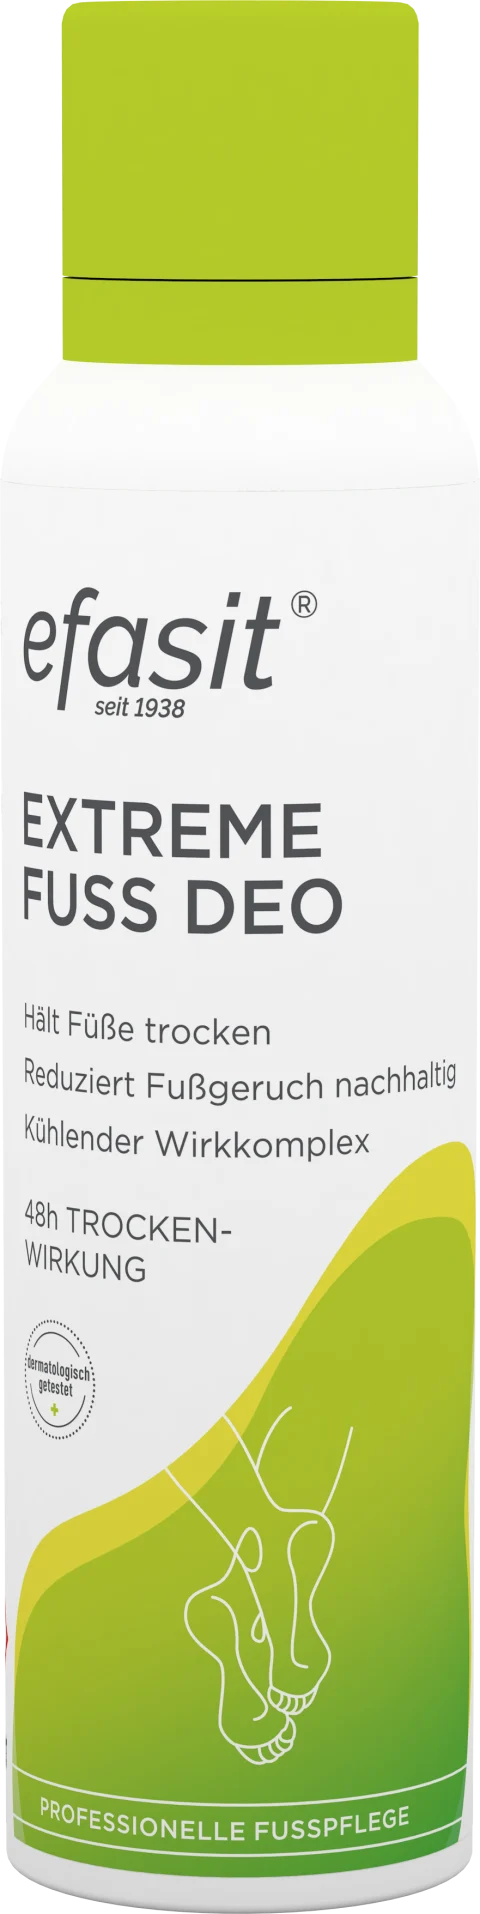 Extreme Fuß Deo